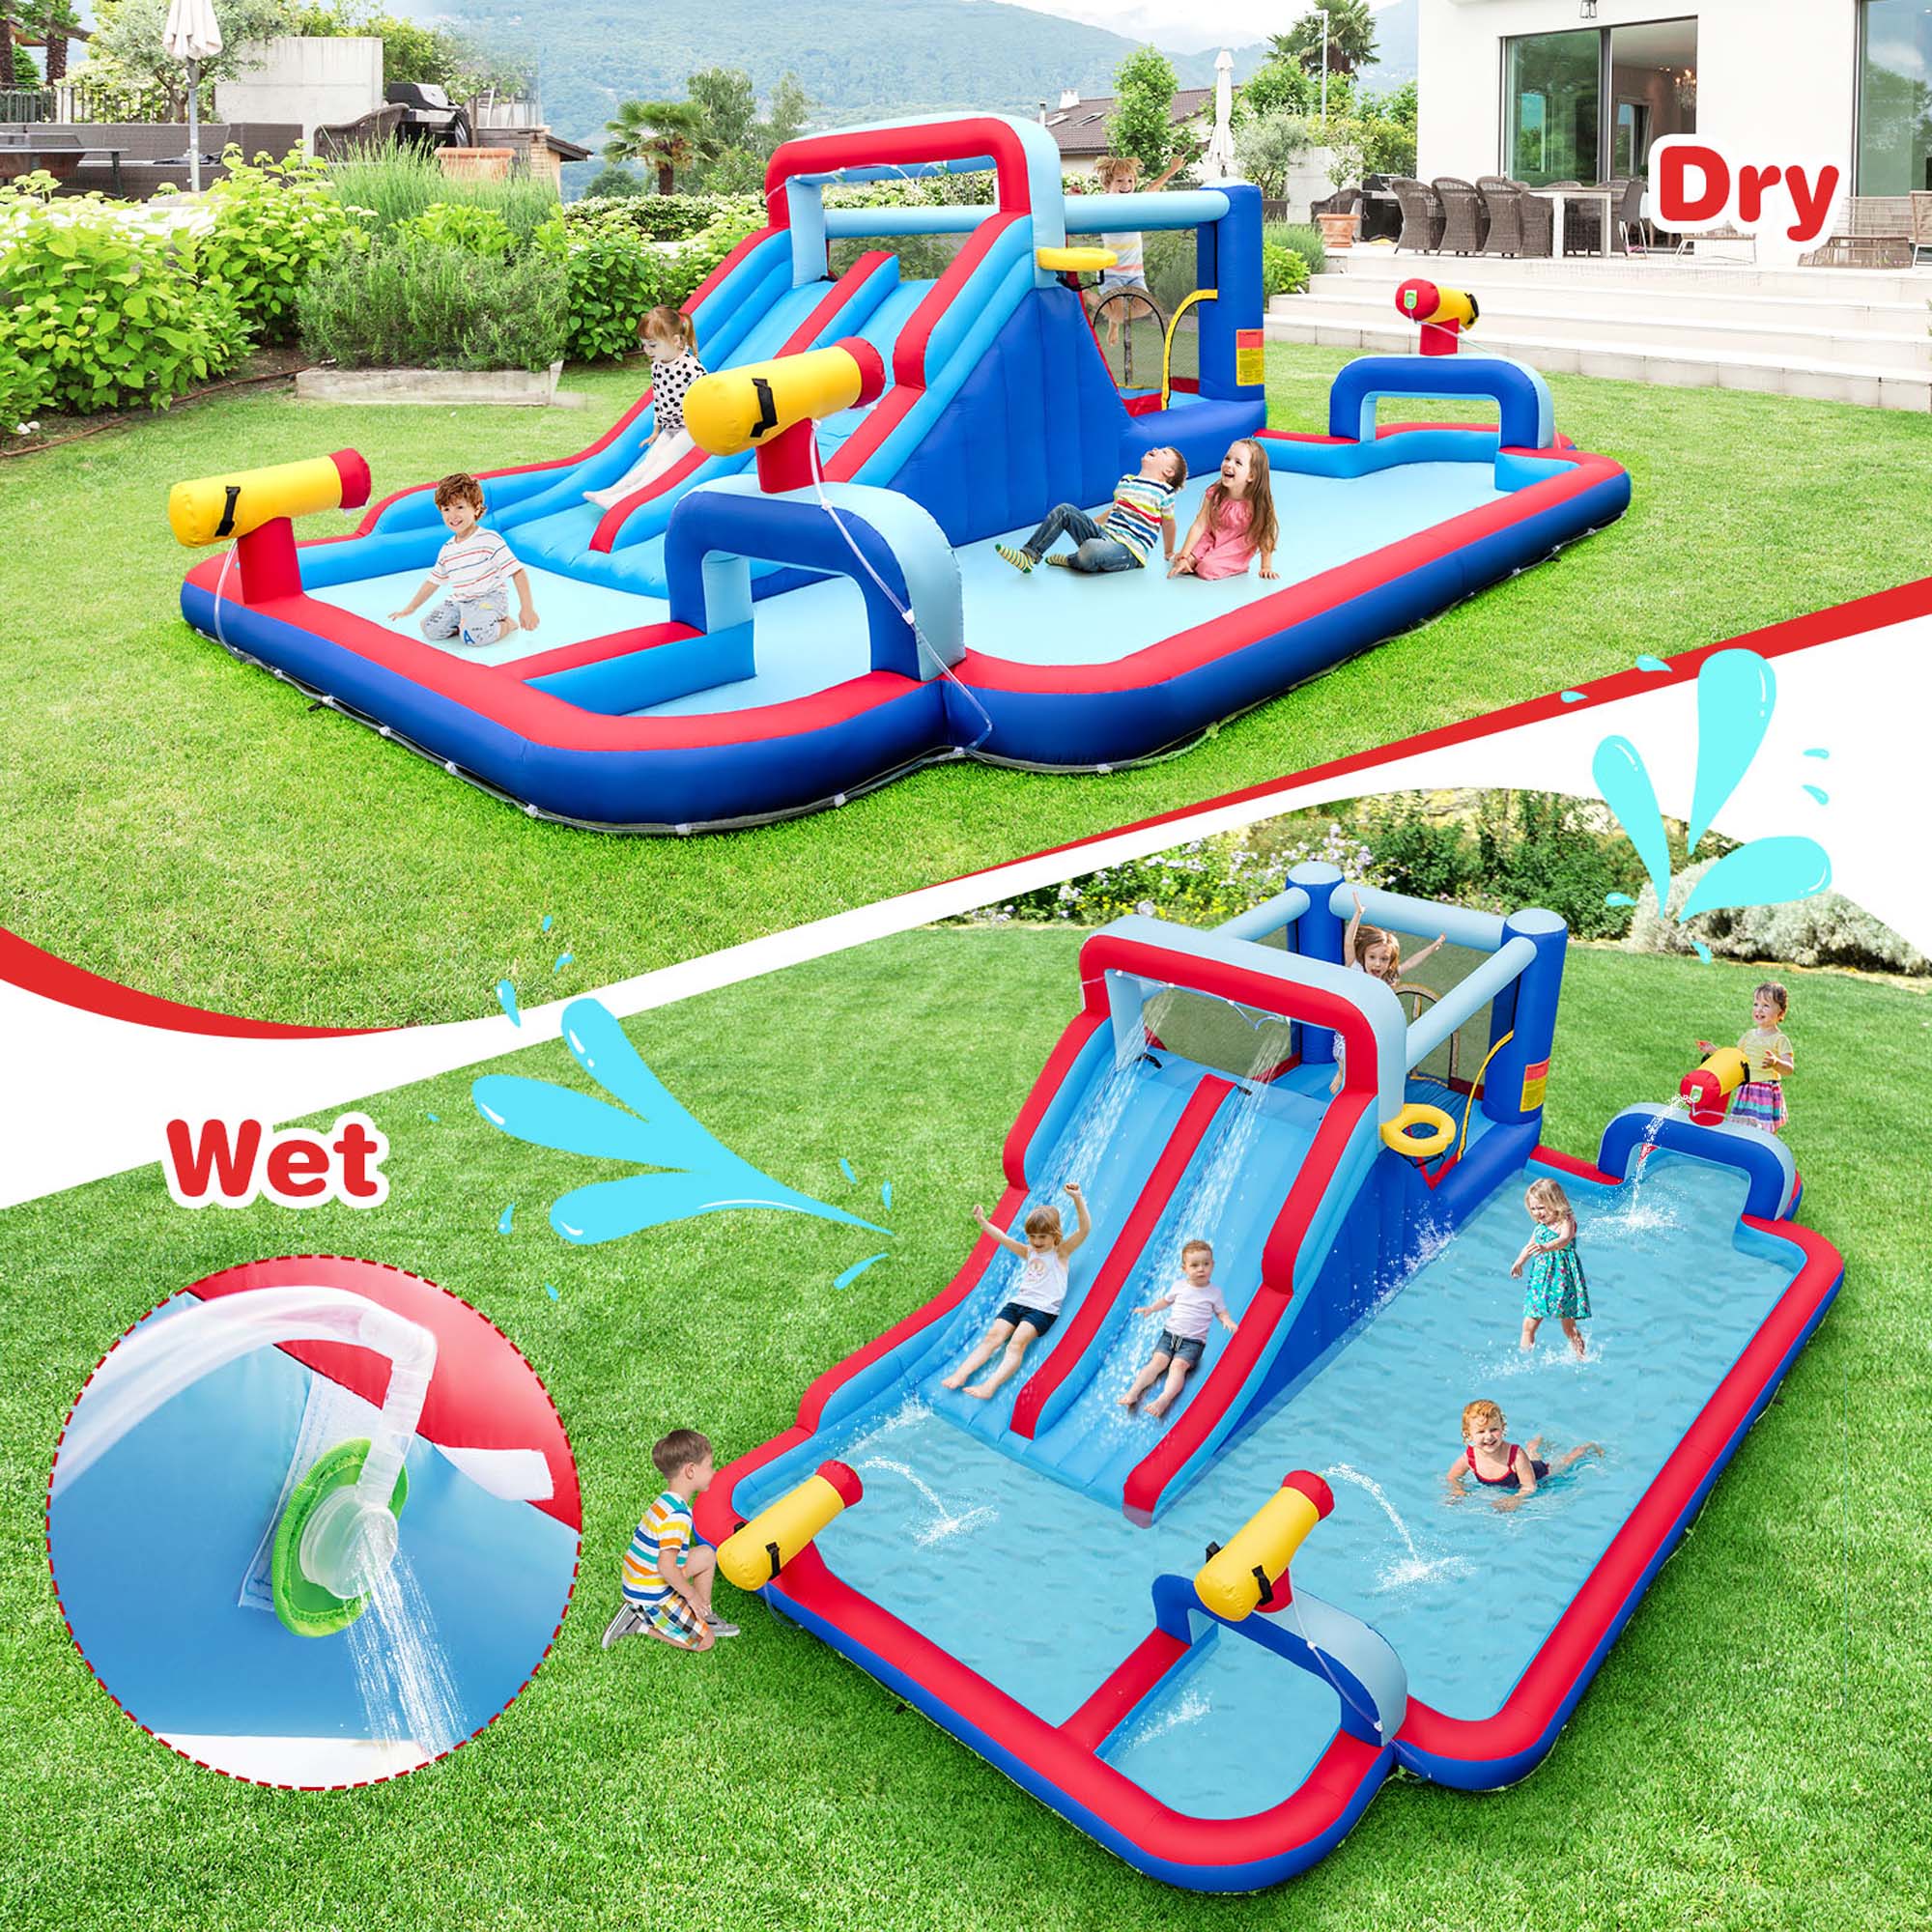 Costway Inflatable Water Slide Park Kids Bounce House Climbing Jumping with 750W Blower